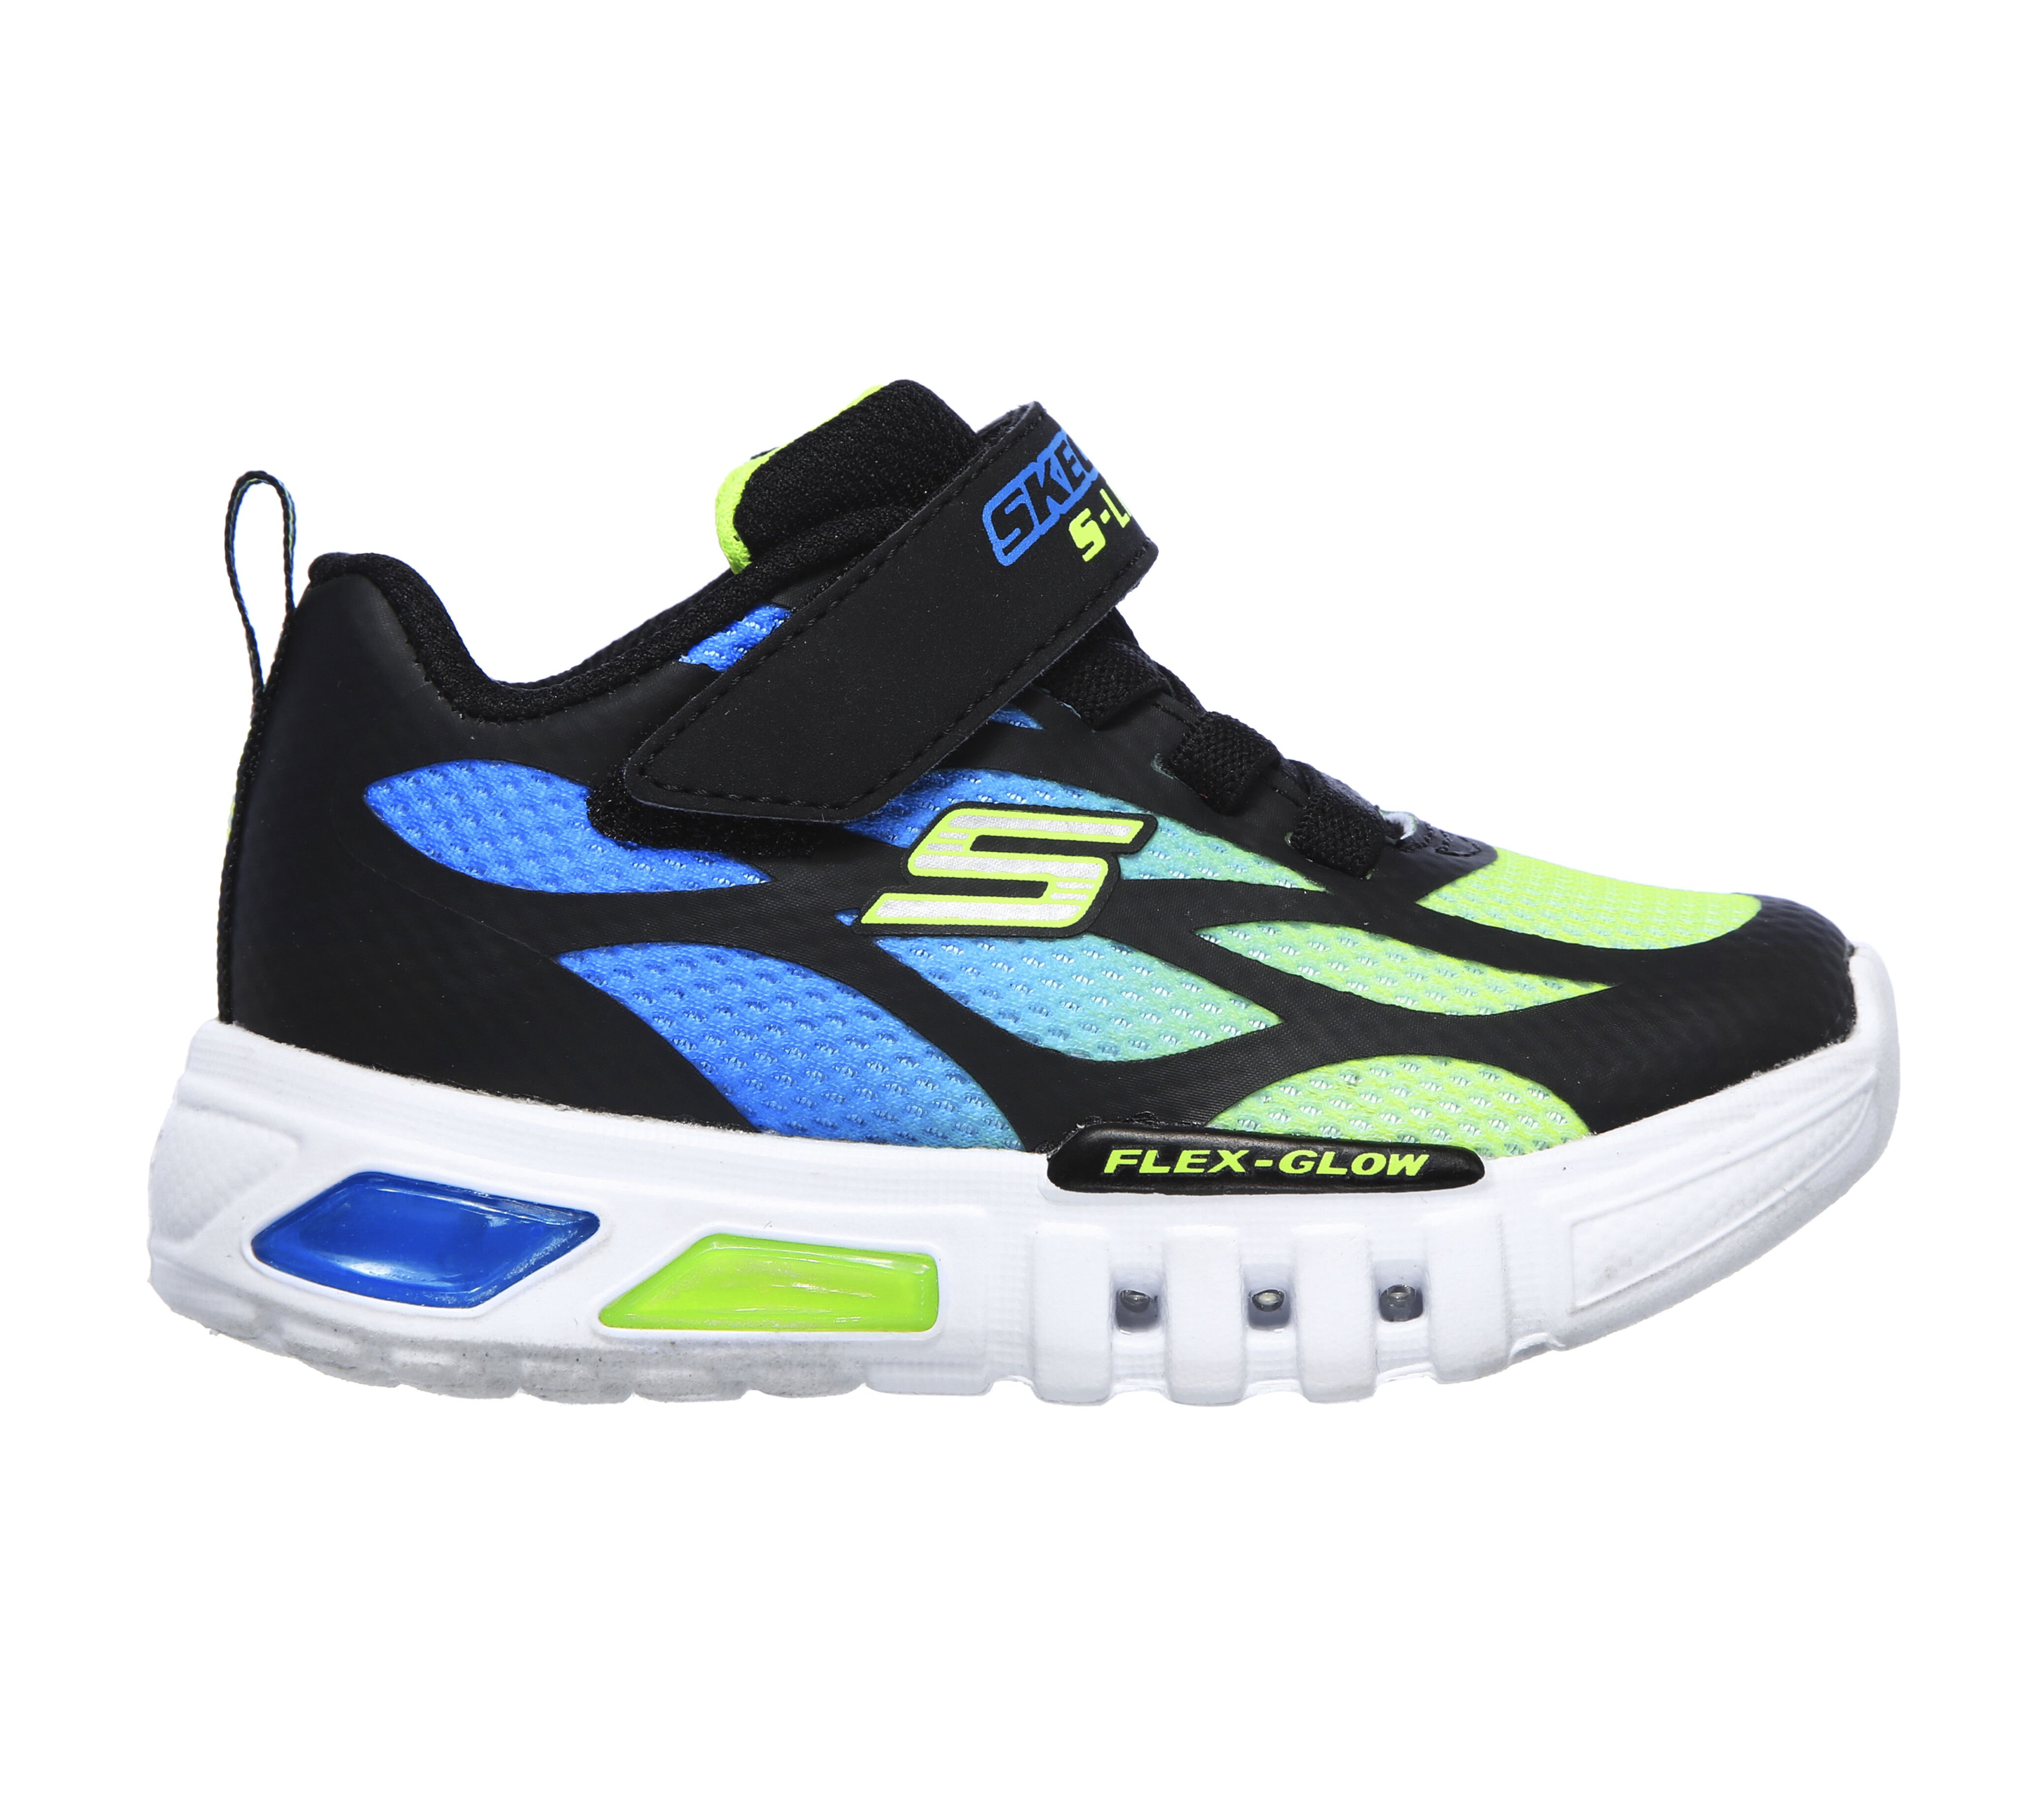 skechers light up shoes price